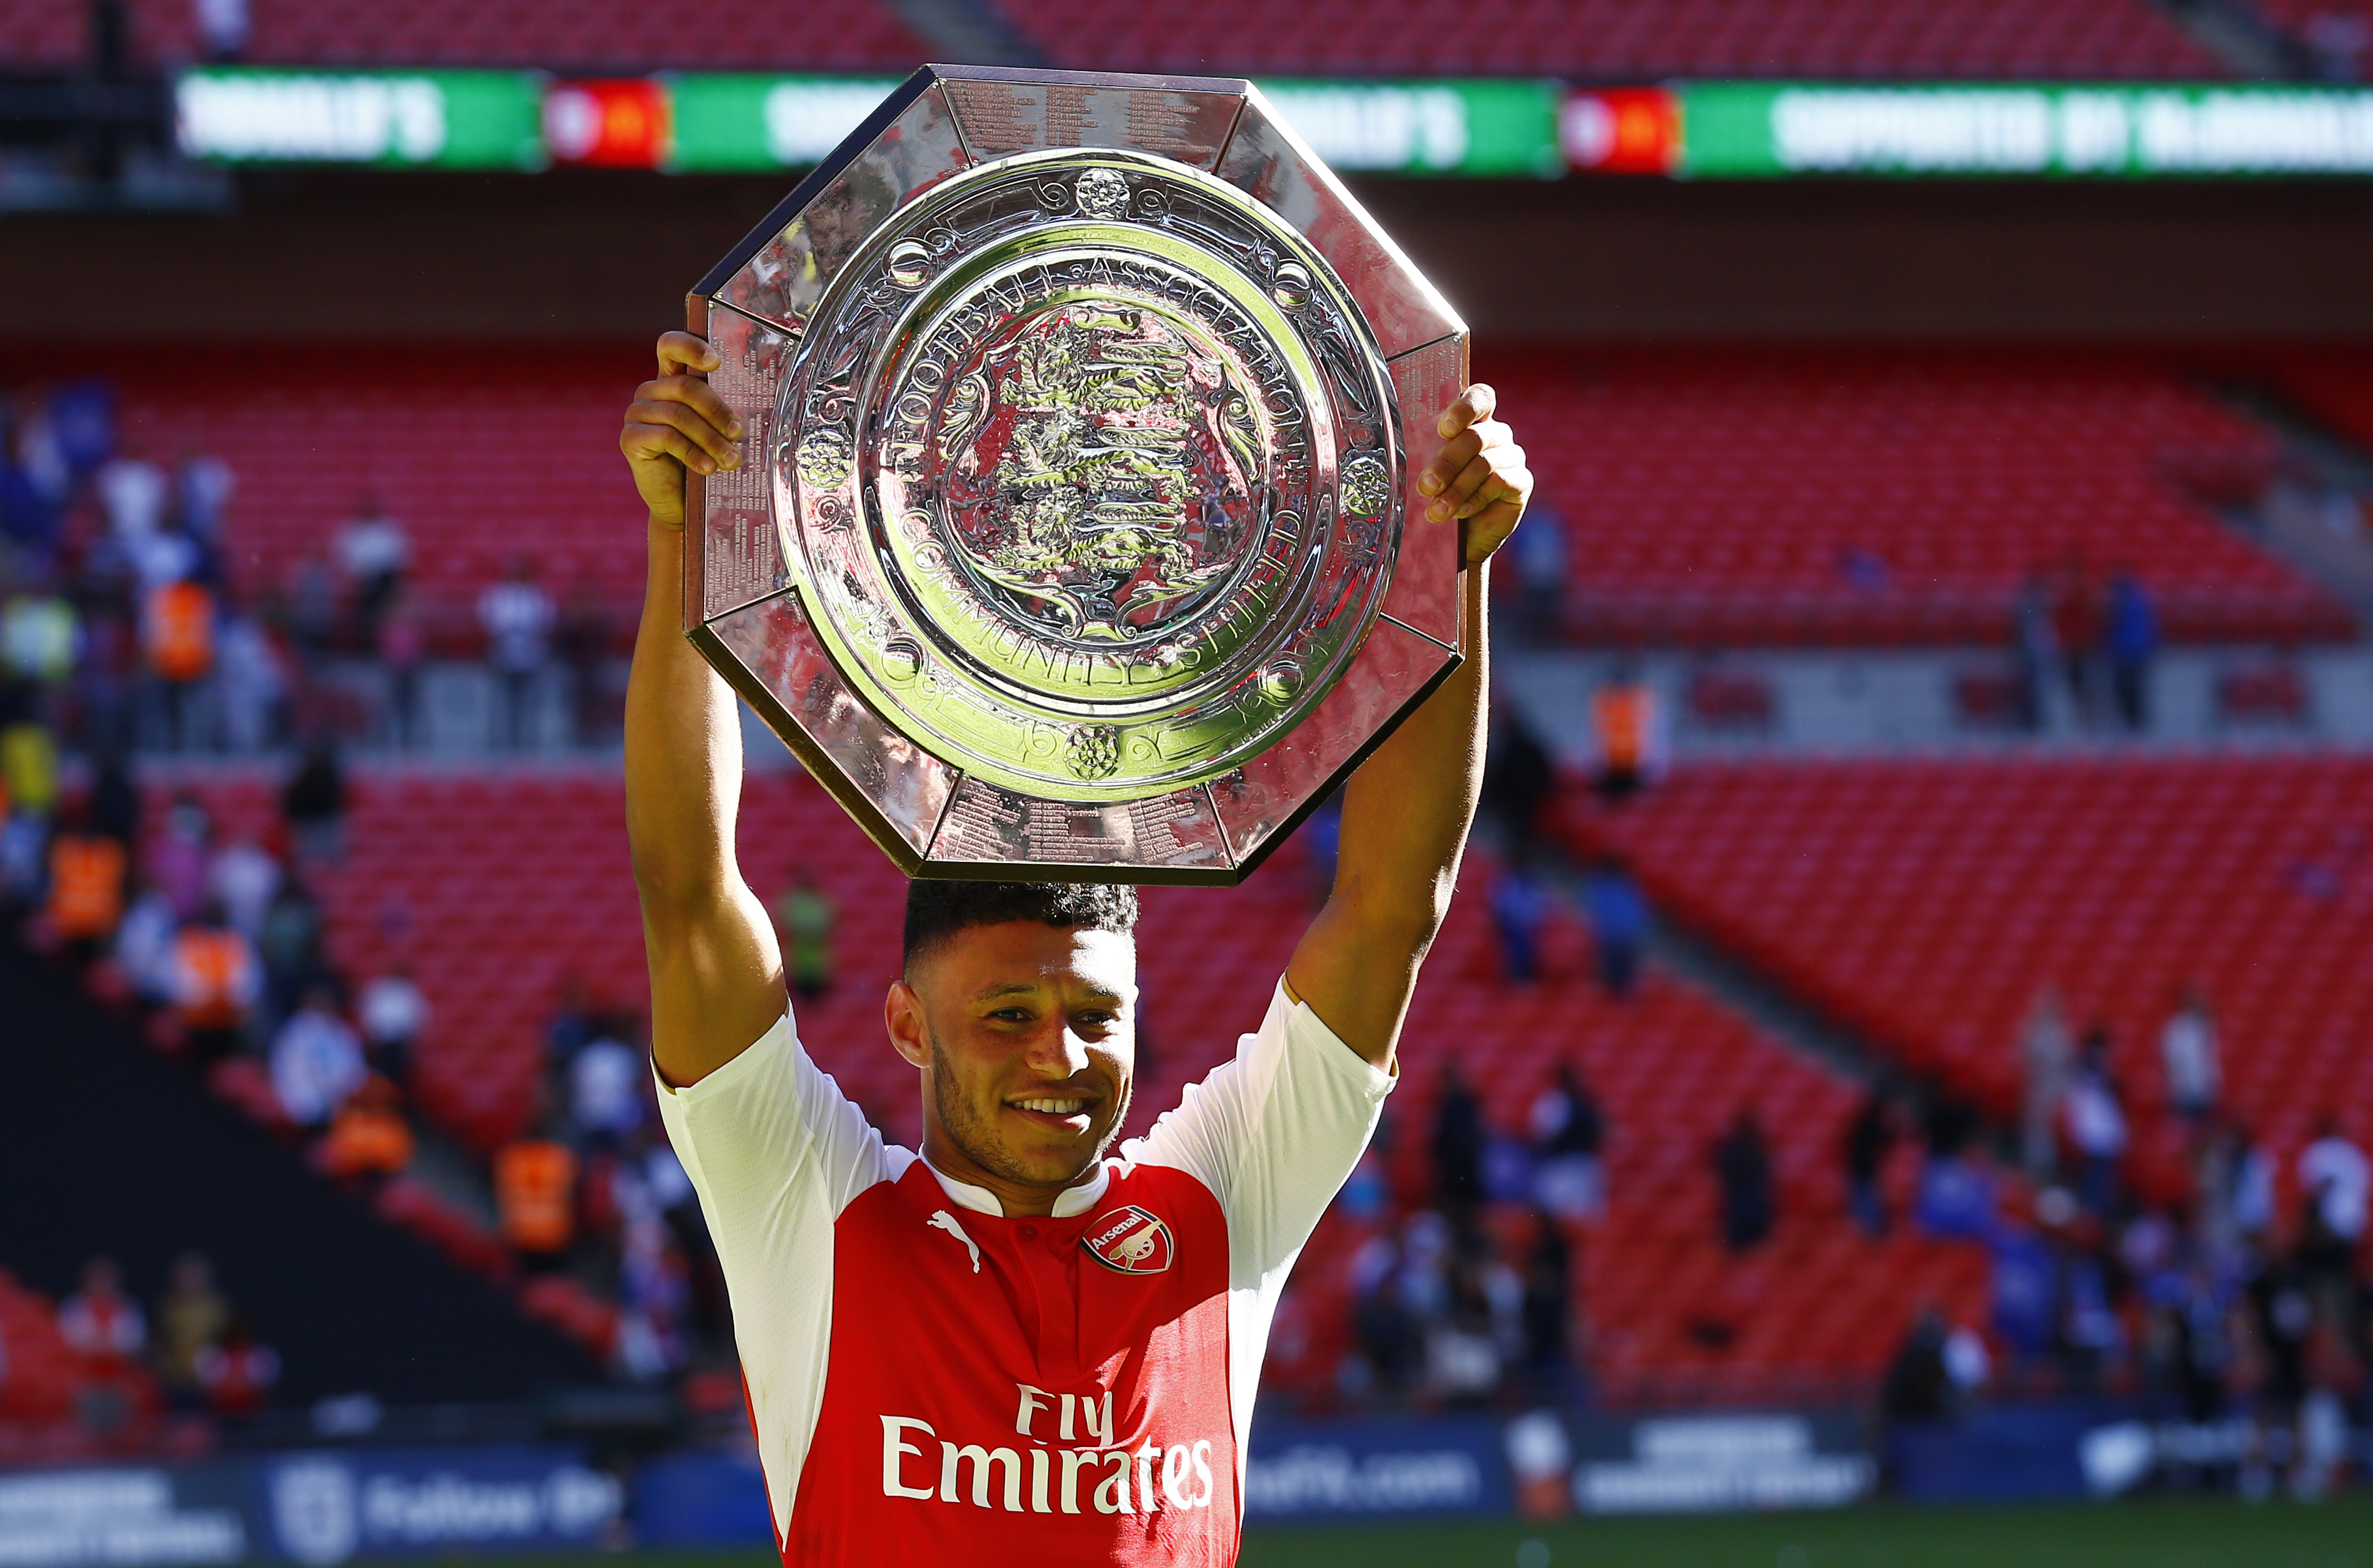 Football - Chelsea v Arsenal - FA Community Shield - Wembley Stadium - 2/8/15 Arsenal's Alex Oxlade Chamberlain celebrates with the trophy after winning the FA Community Shield - (c) Reuters / Darren Staples Livepic 